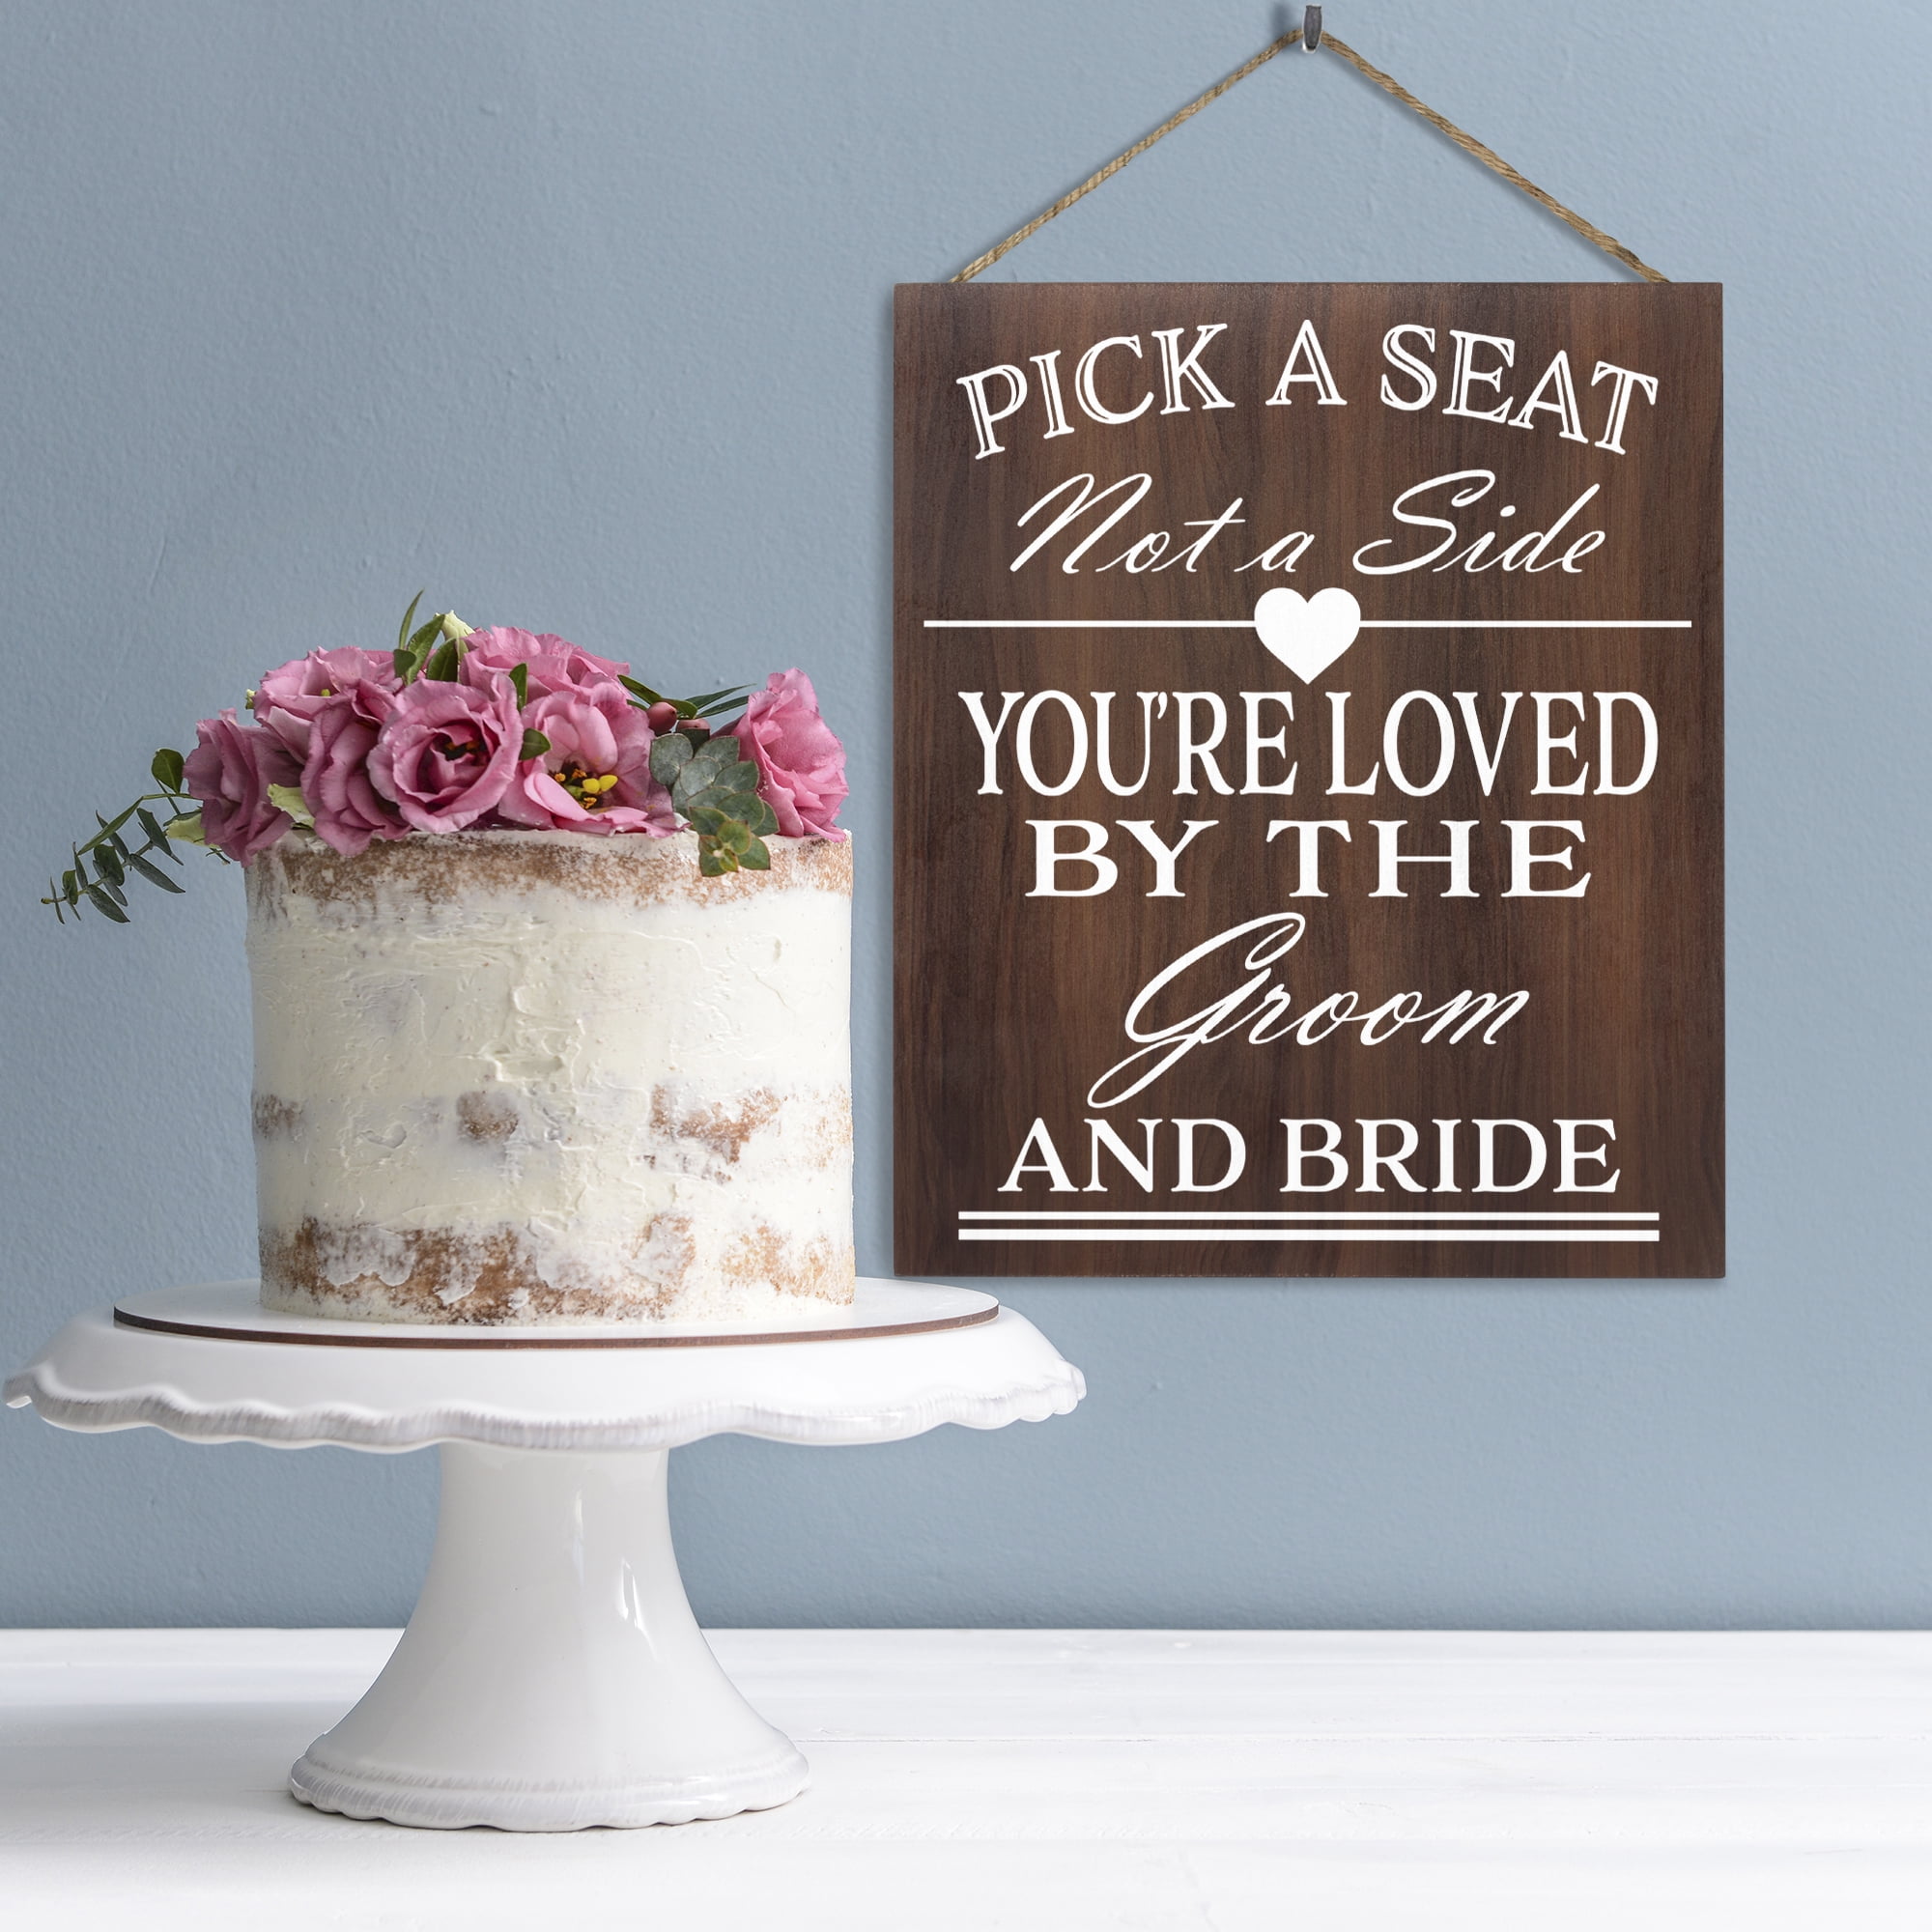 Unique Rusticpick a seat not a siderustic wedding wood sign,wedding decor  ,wedding party entrance signs - AliExpress